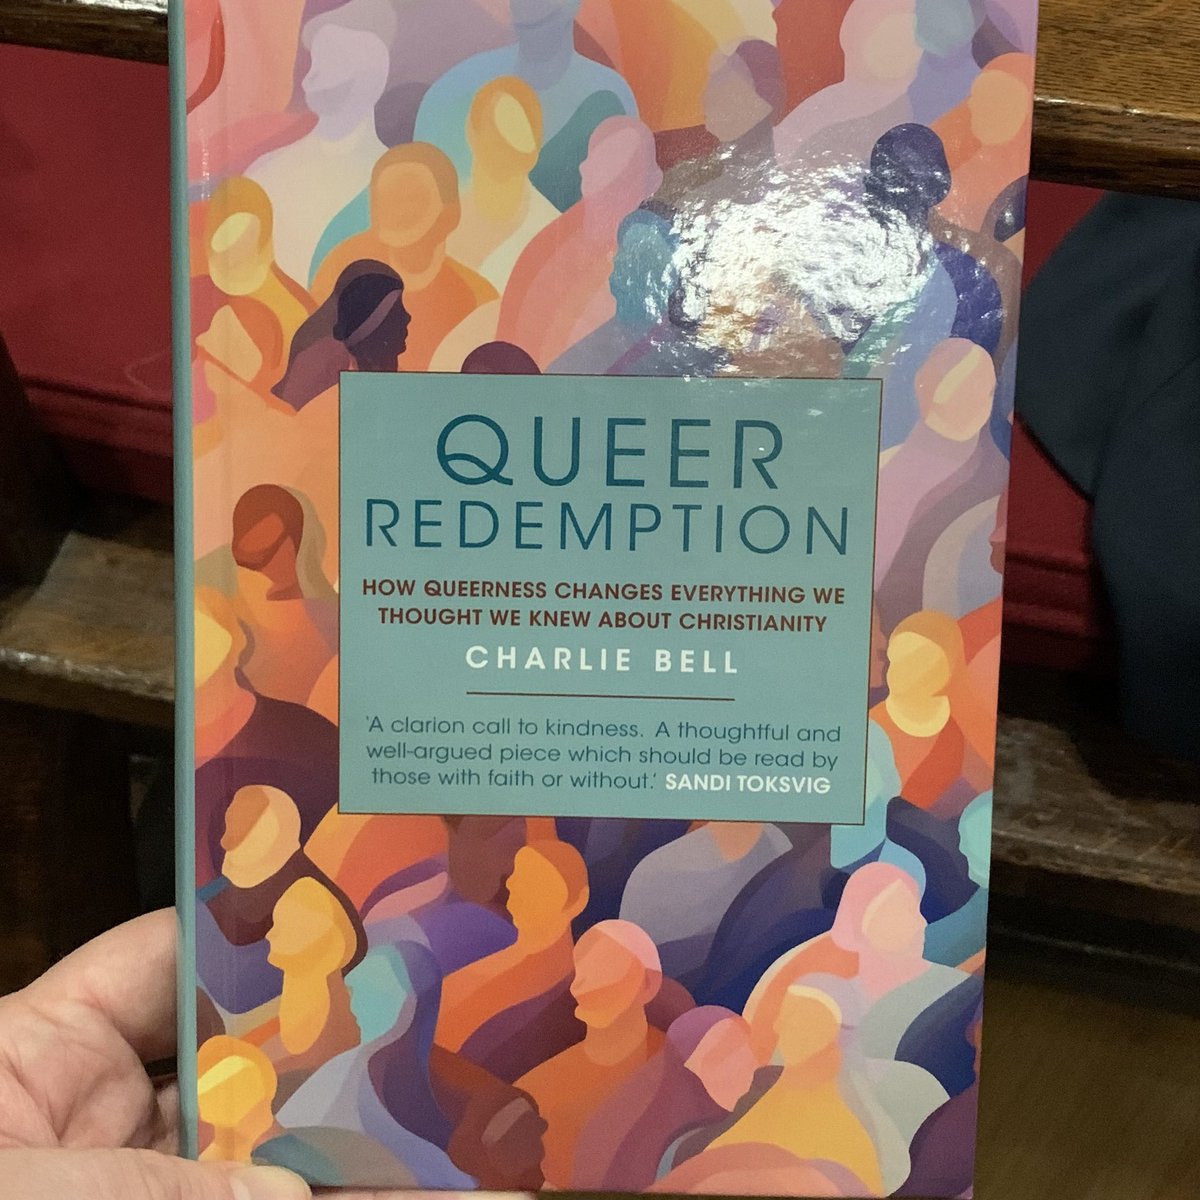 A wonderful evening with two of my favourite Queer Christians, The Revd Dr Charlie Bell and Ruth, The Baroness Hunt of Bethnal Green, in conversation launching Charlie’s new book #QueerRedemption at @KingsCollegeLon. Well done @charliebelllive, you’re awesome.